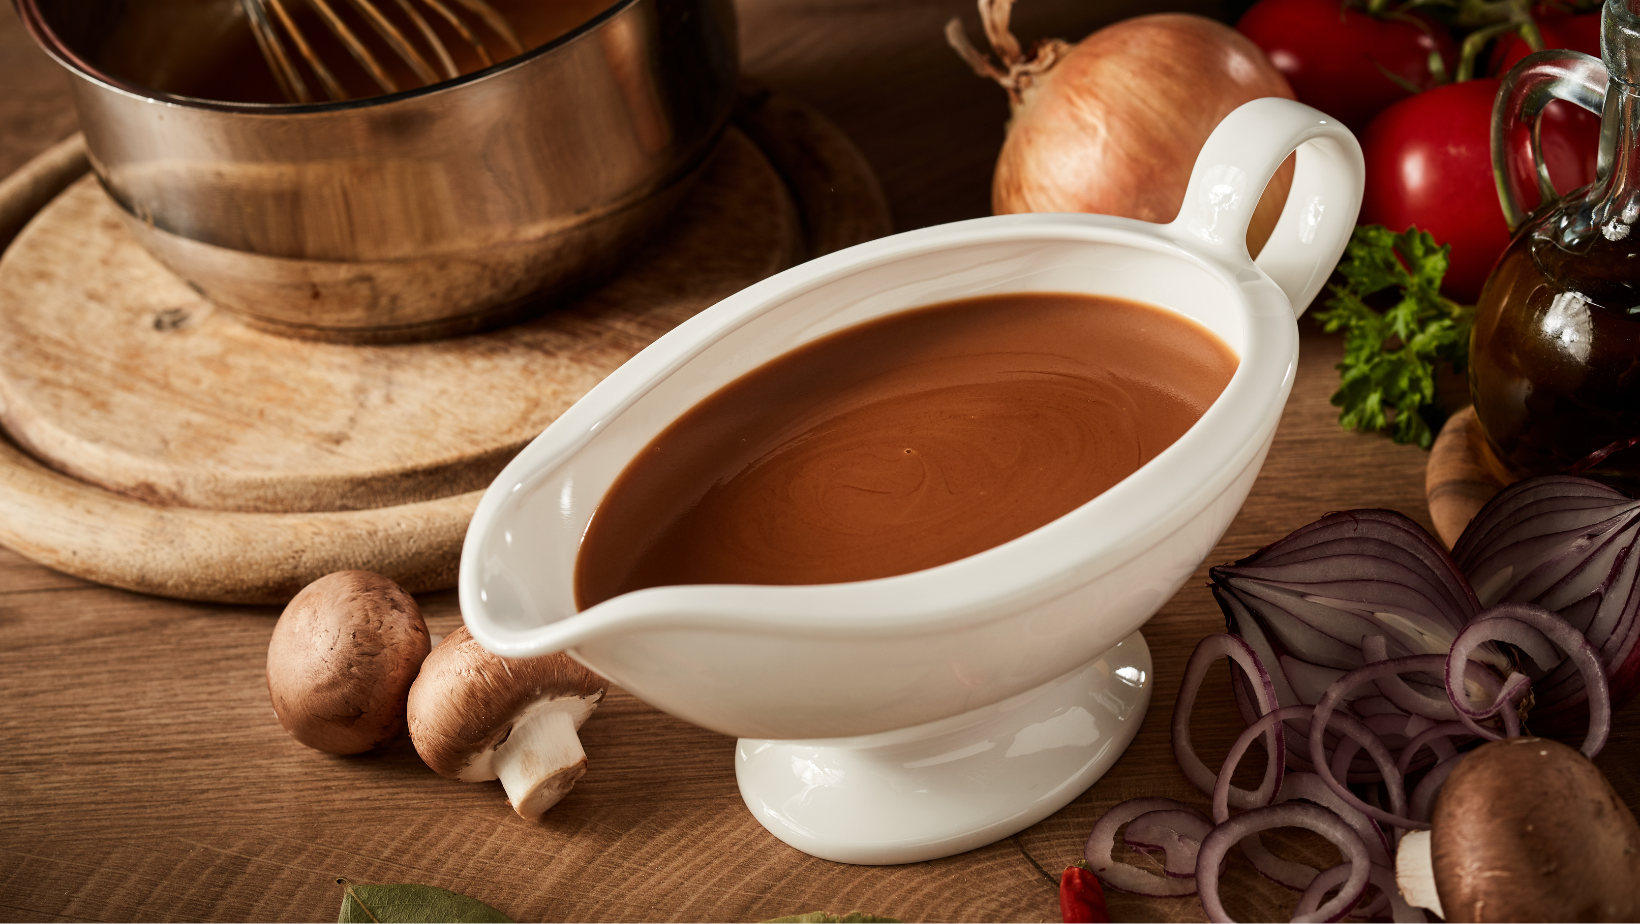 Gravy boat with serving of delicious rich brown sauce or gravy